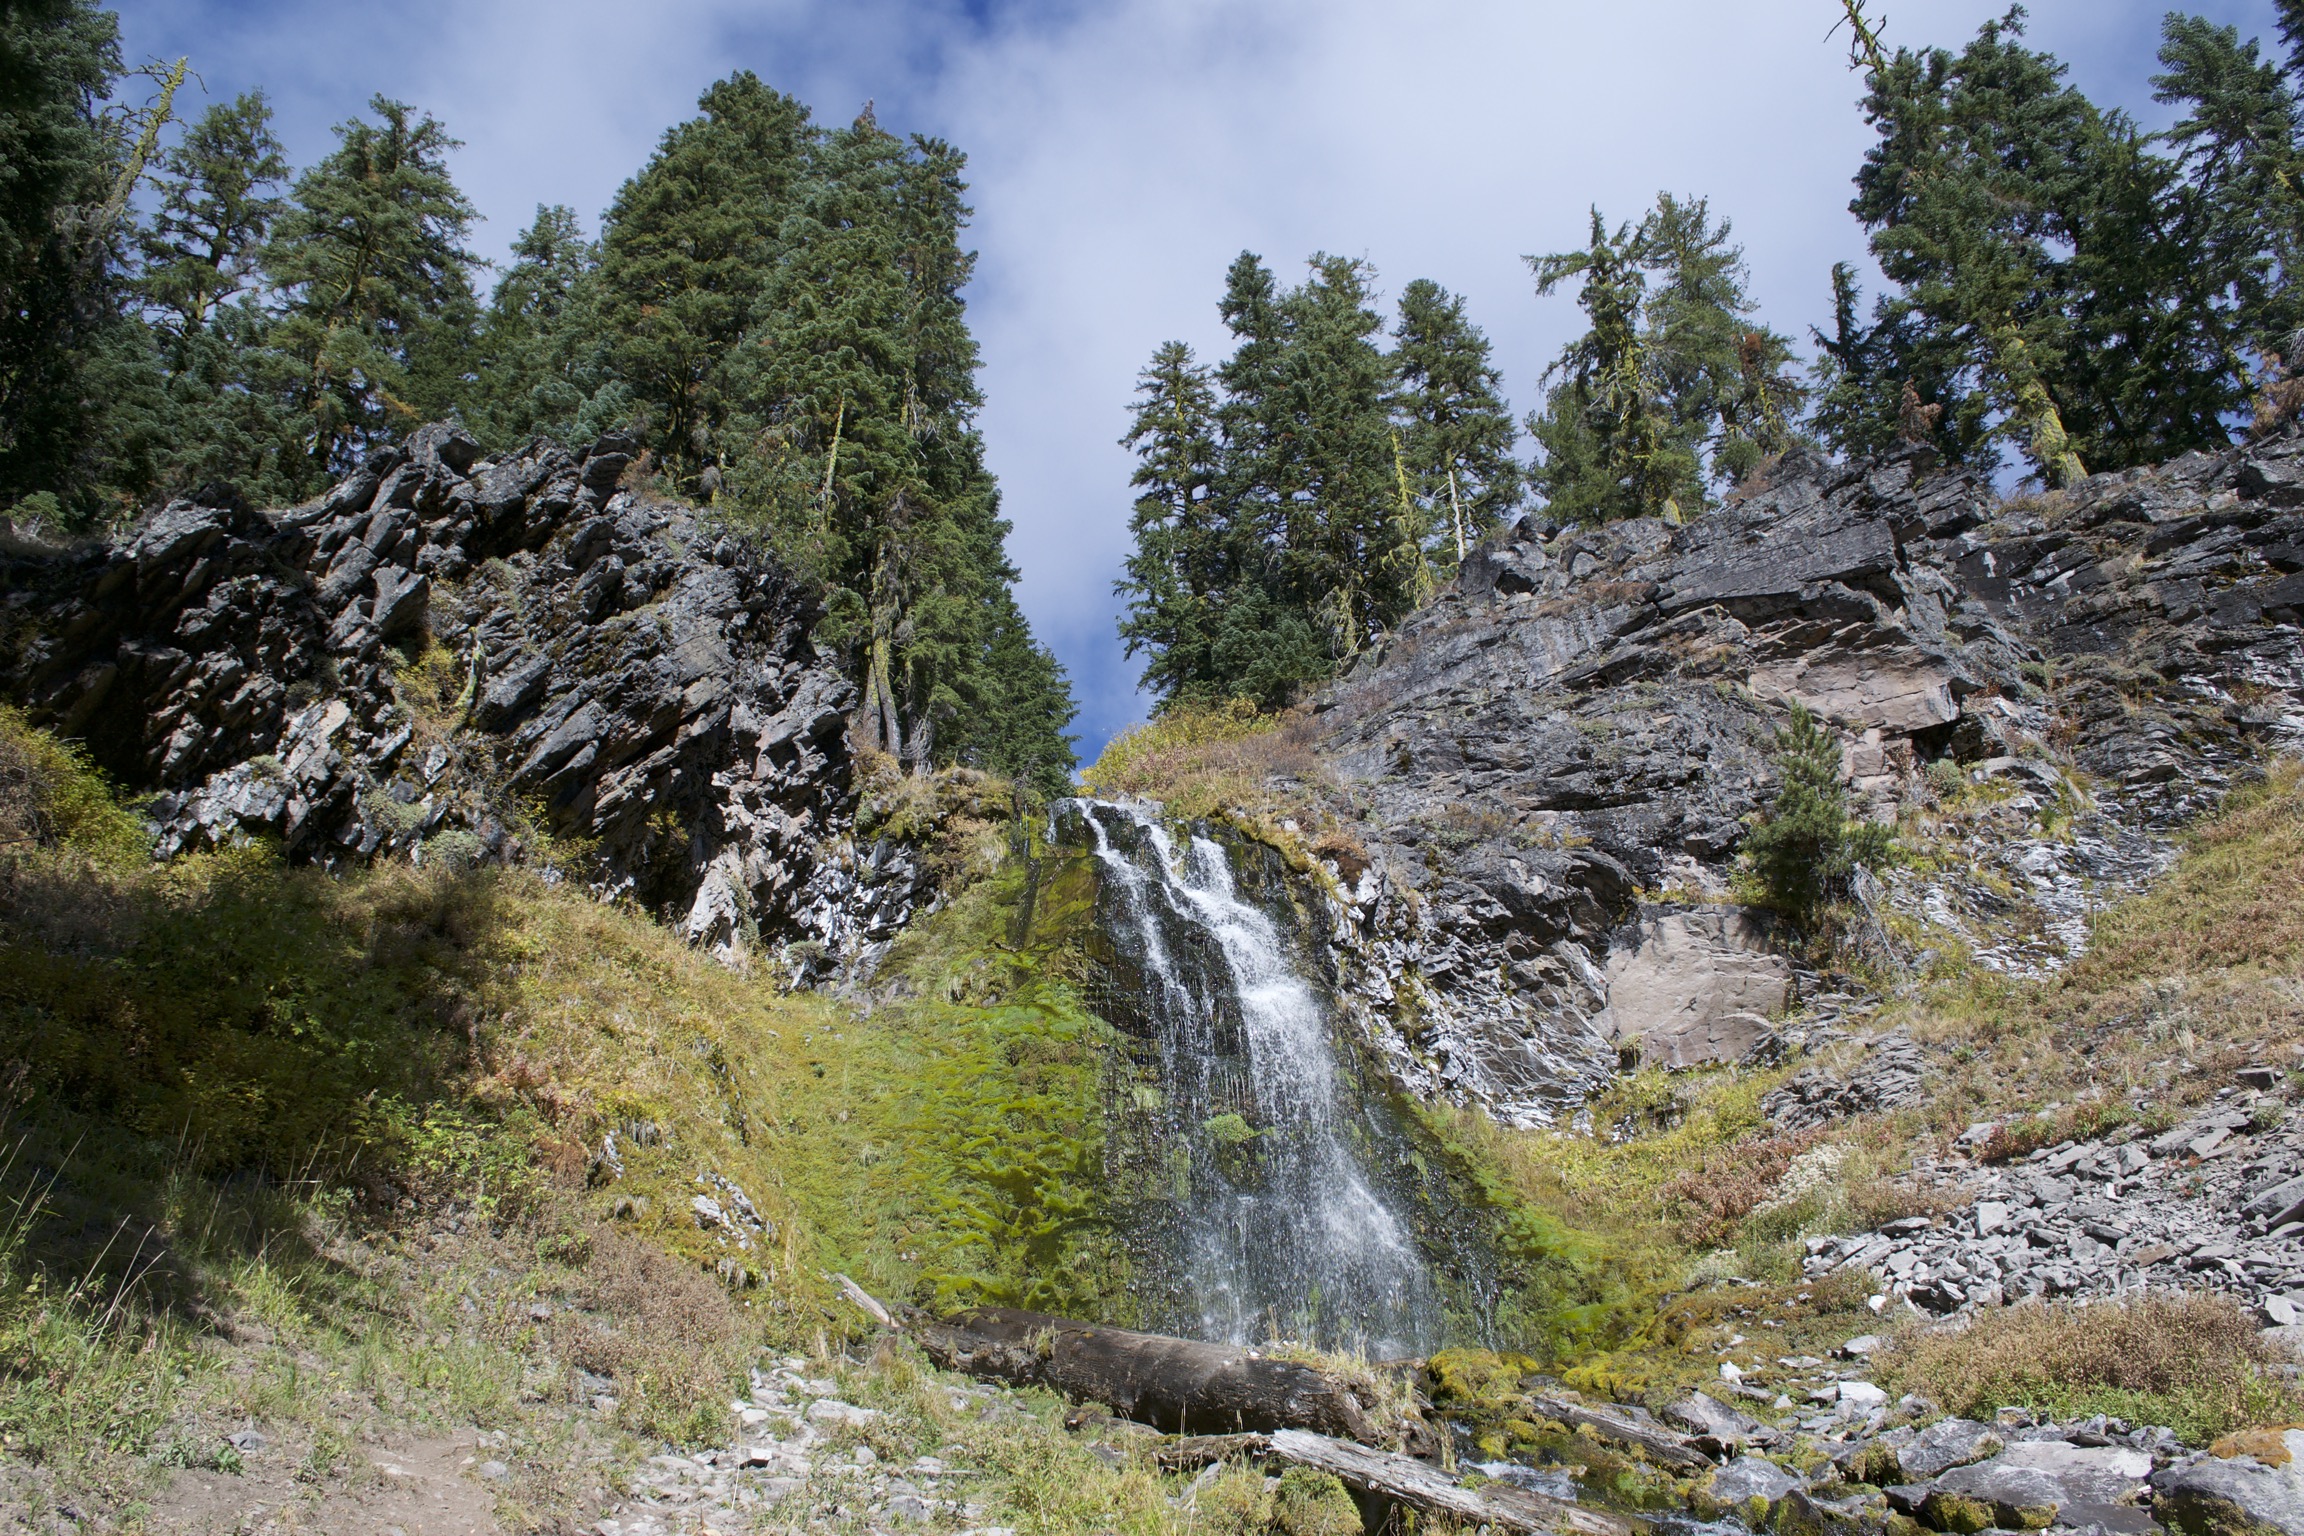 A small waterfall between two grainite crags.